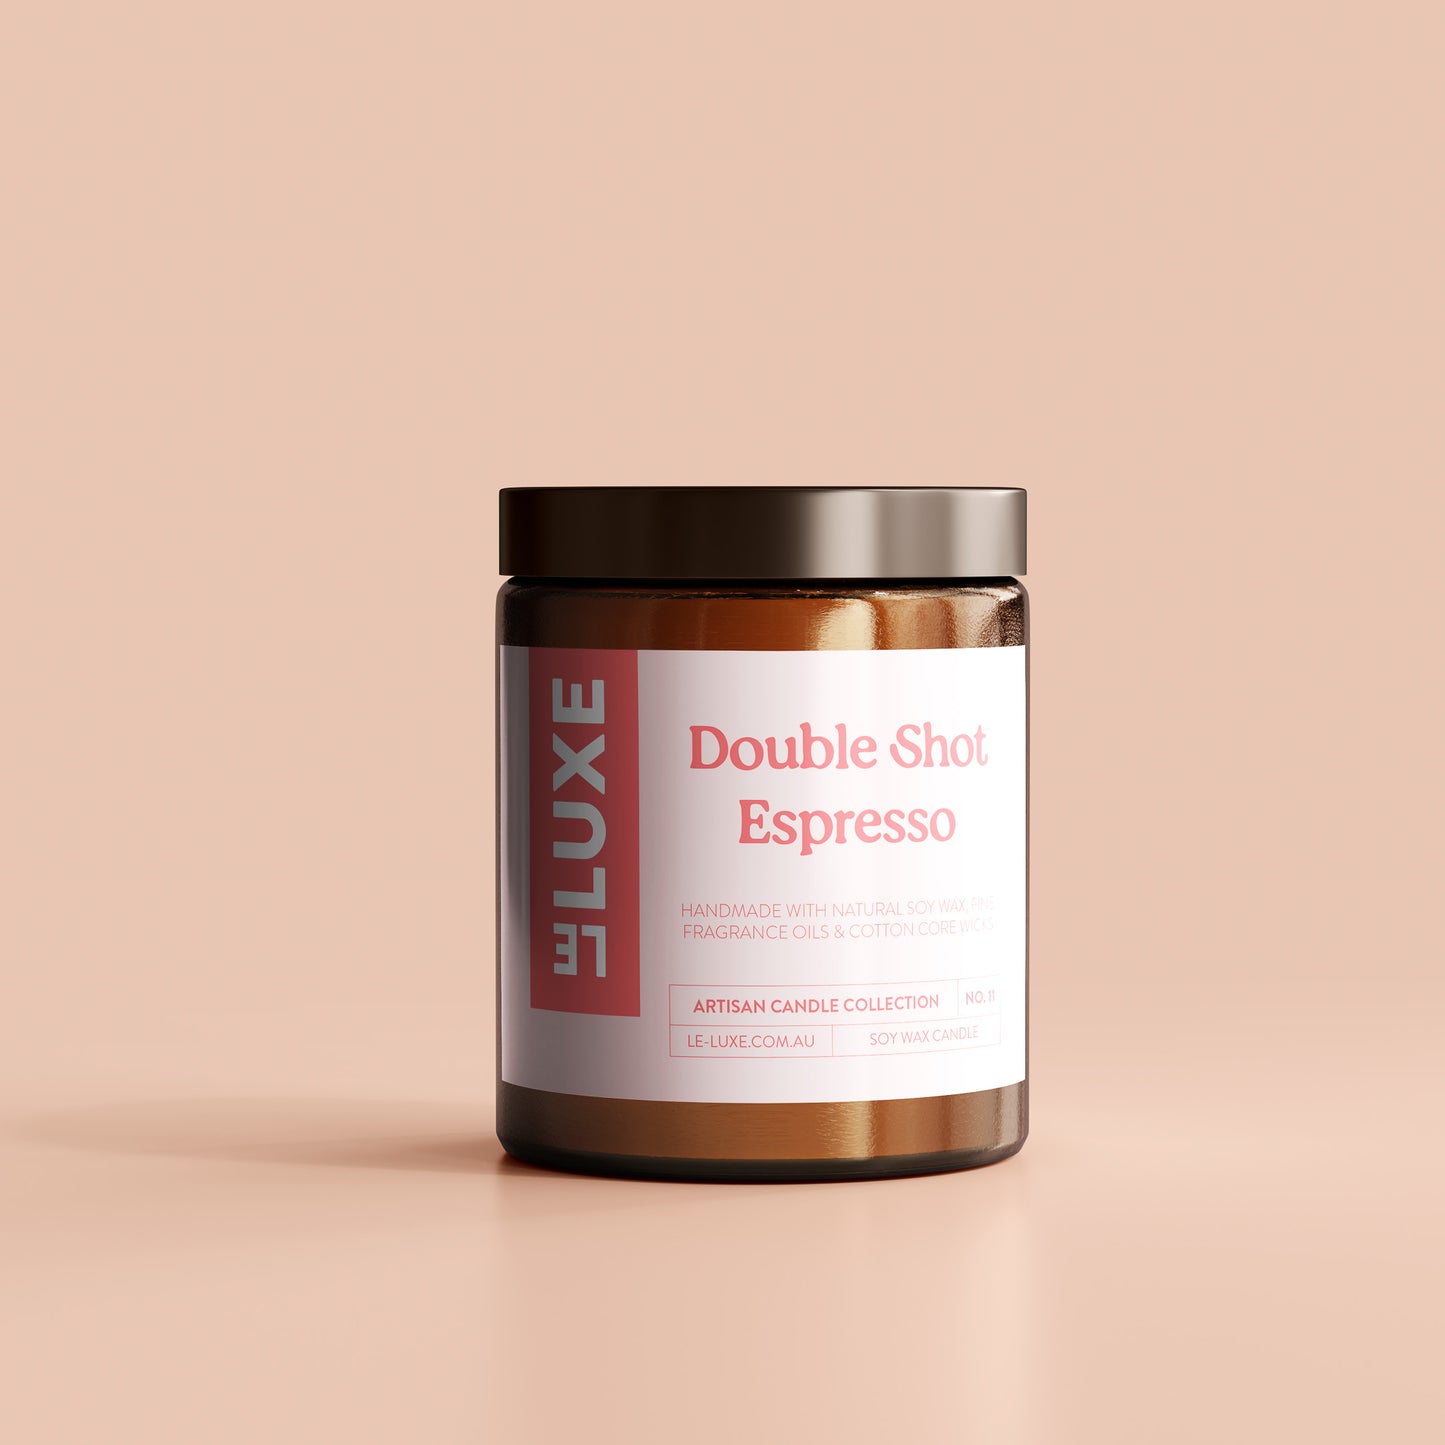 Le Luxe Soy Wax Candle - Double Shot Espresso